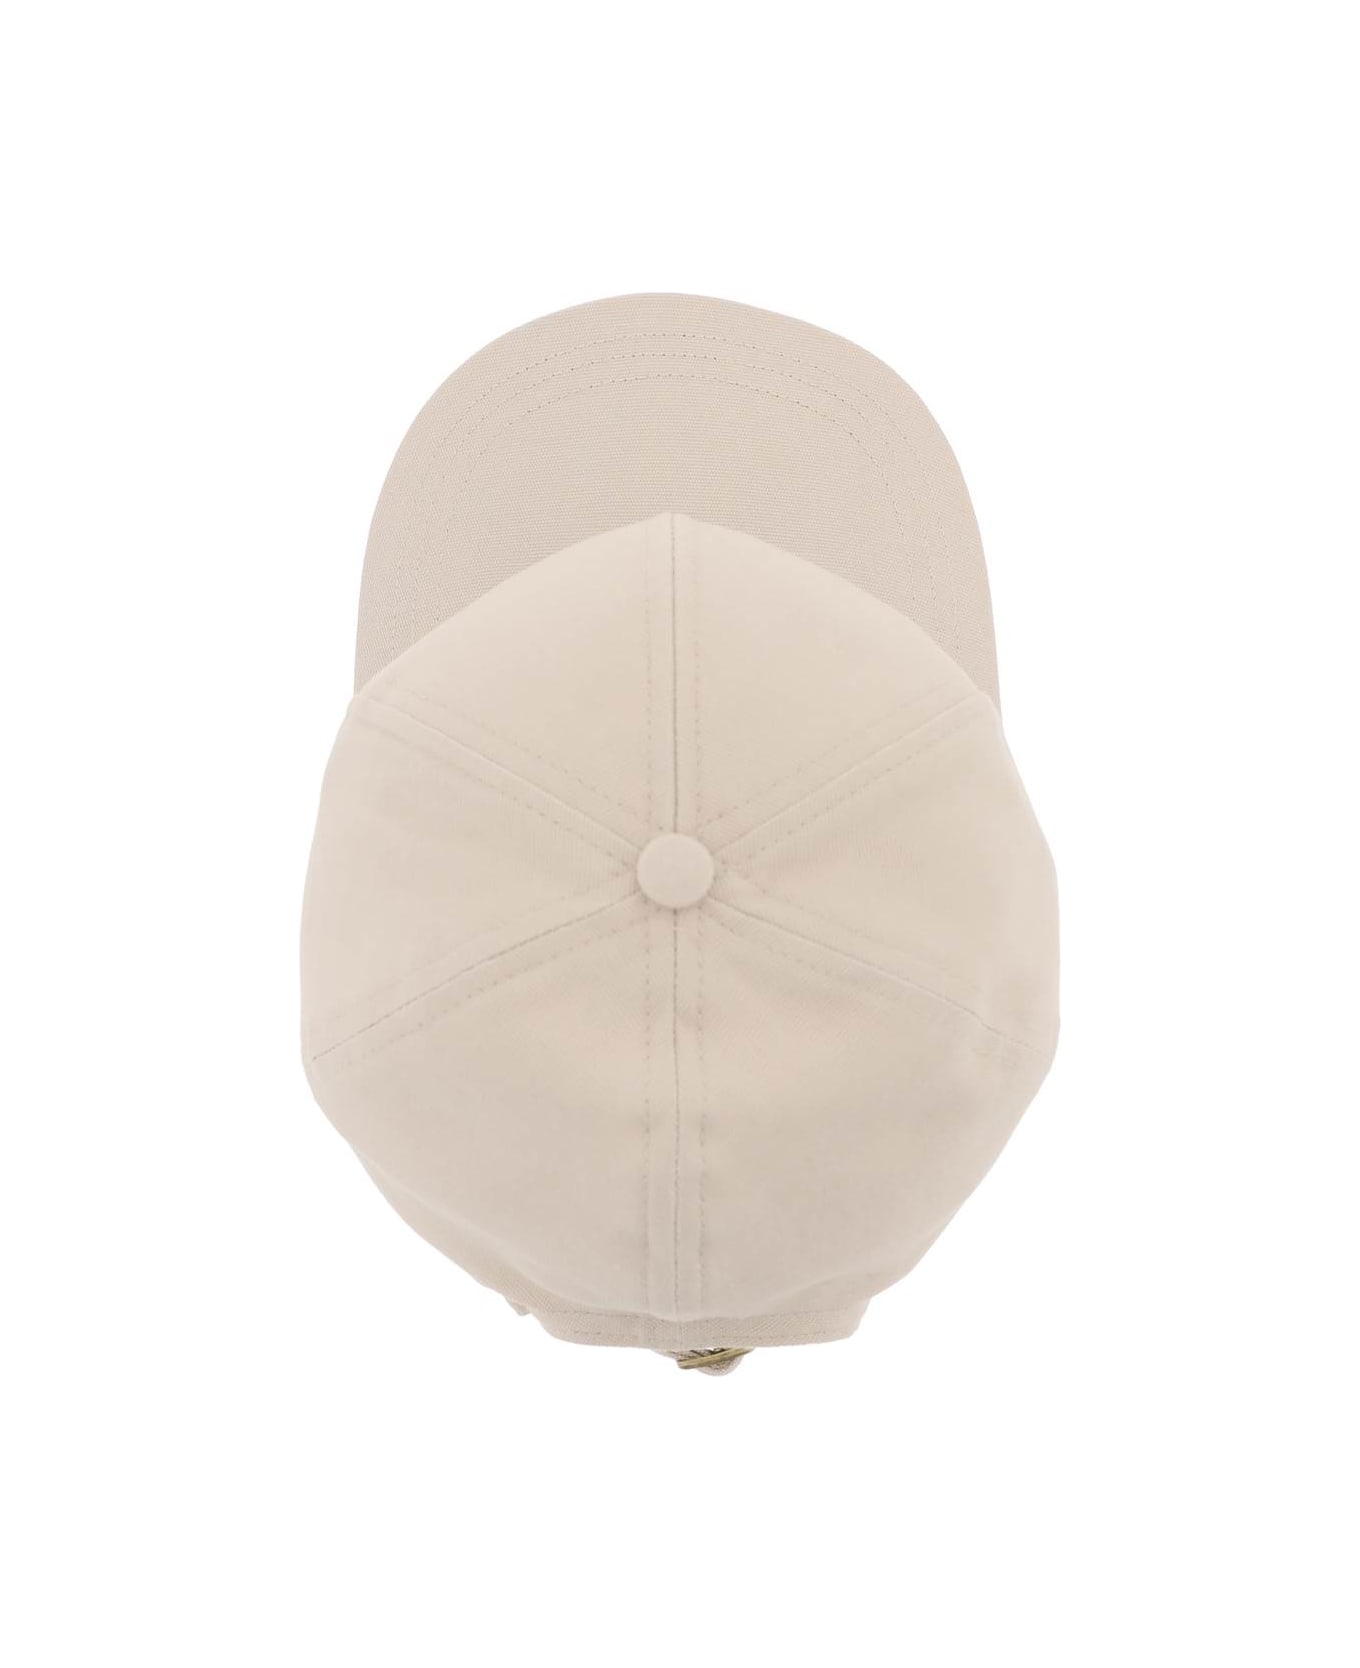 Vivienne Westwood Uni Colour Baseball Cap With Orb Embroidery - SAND (Beige)